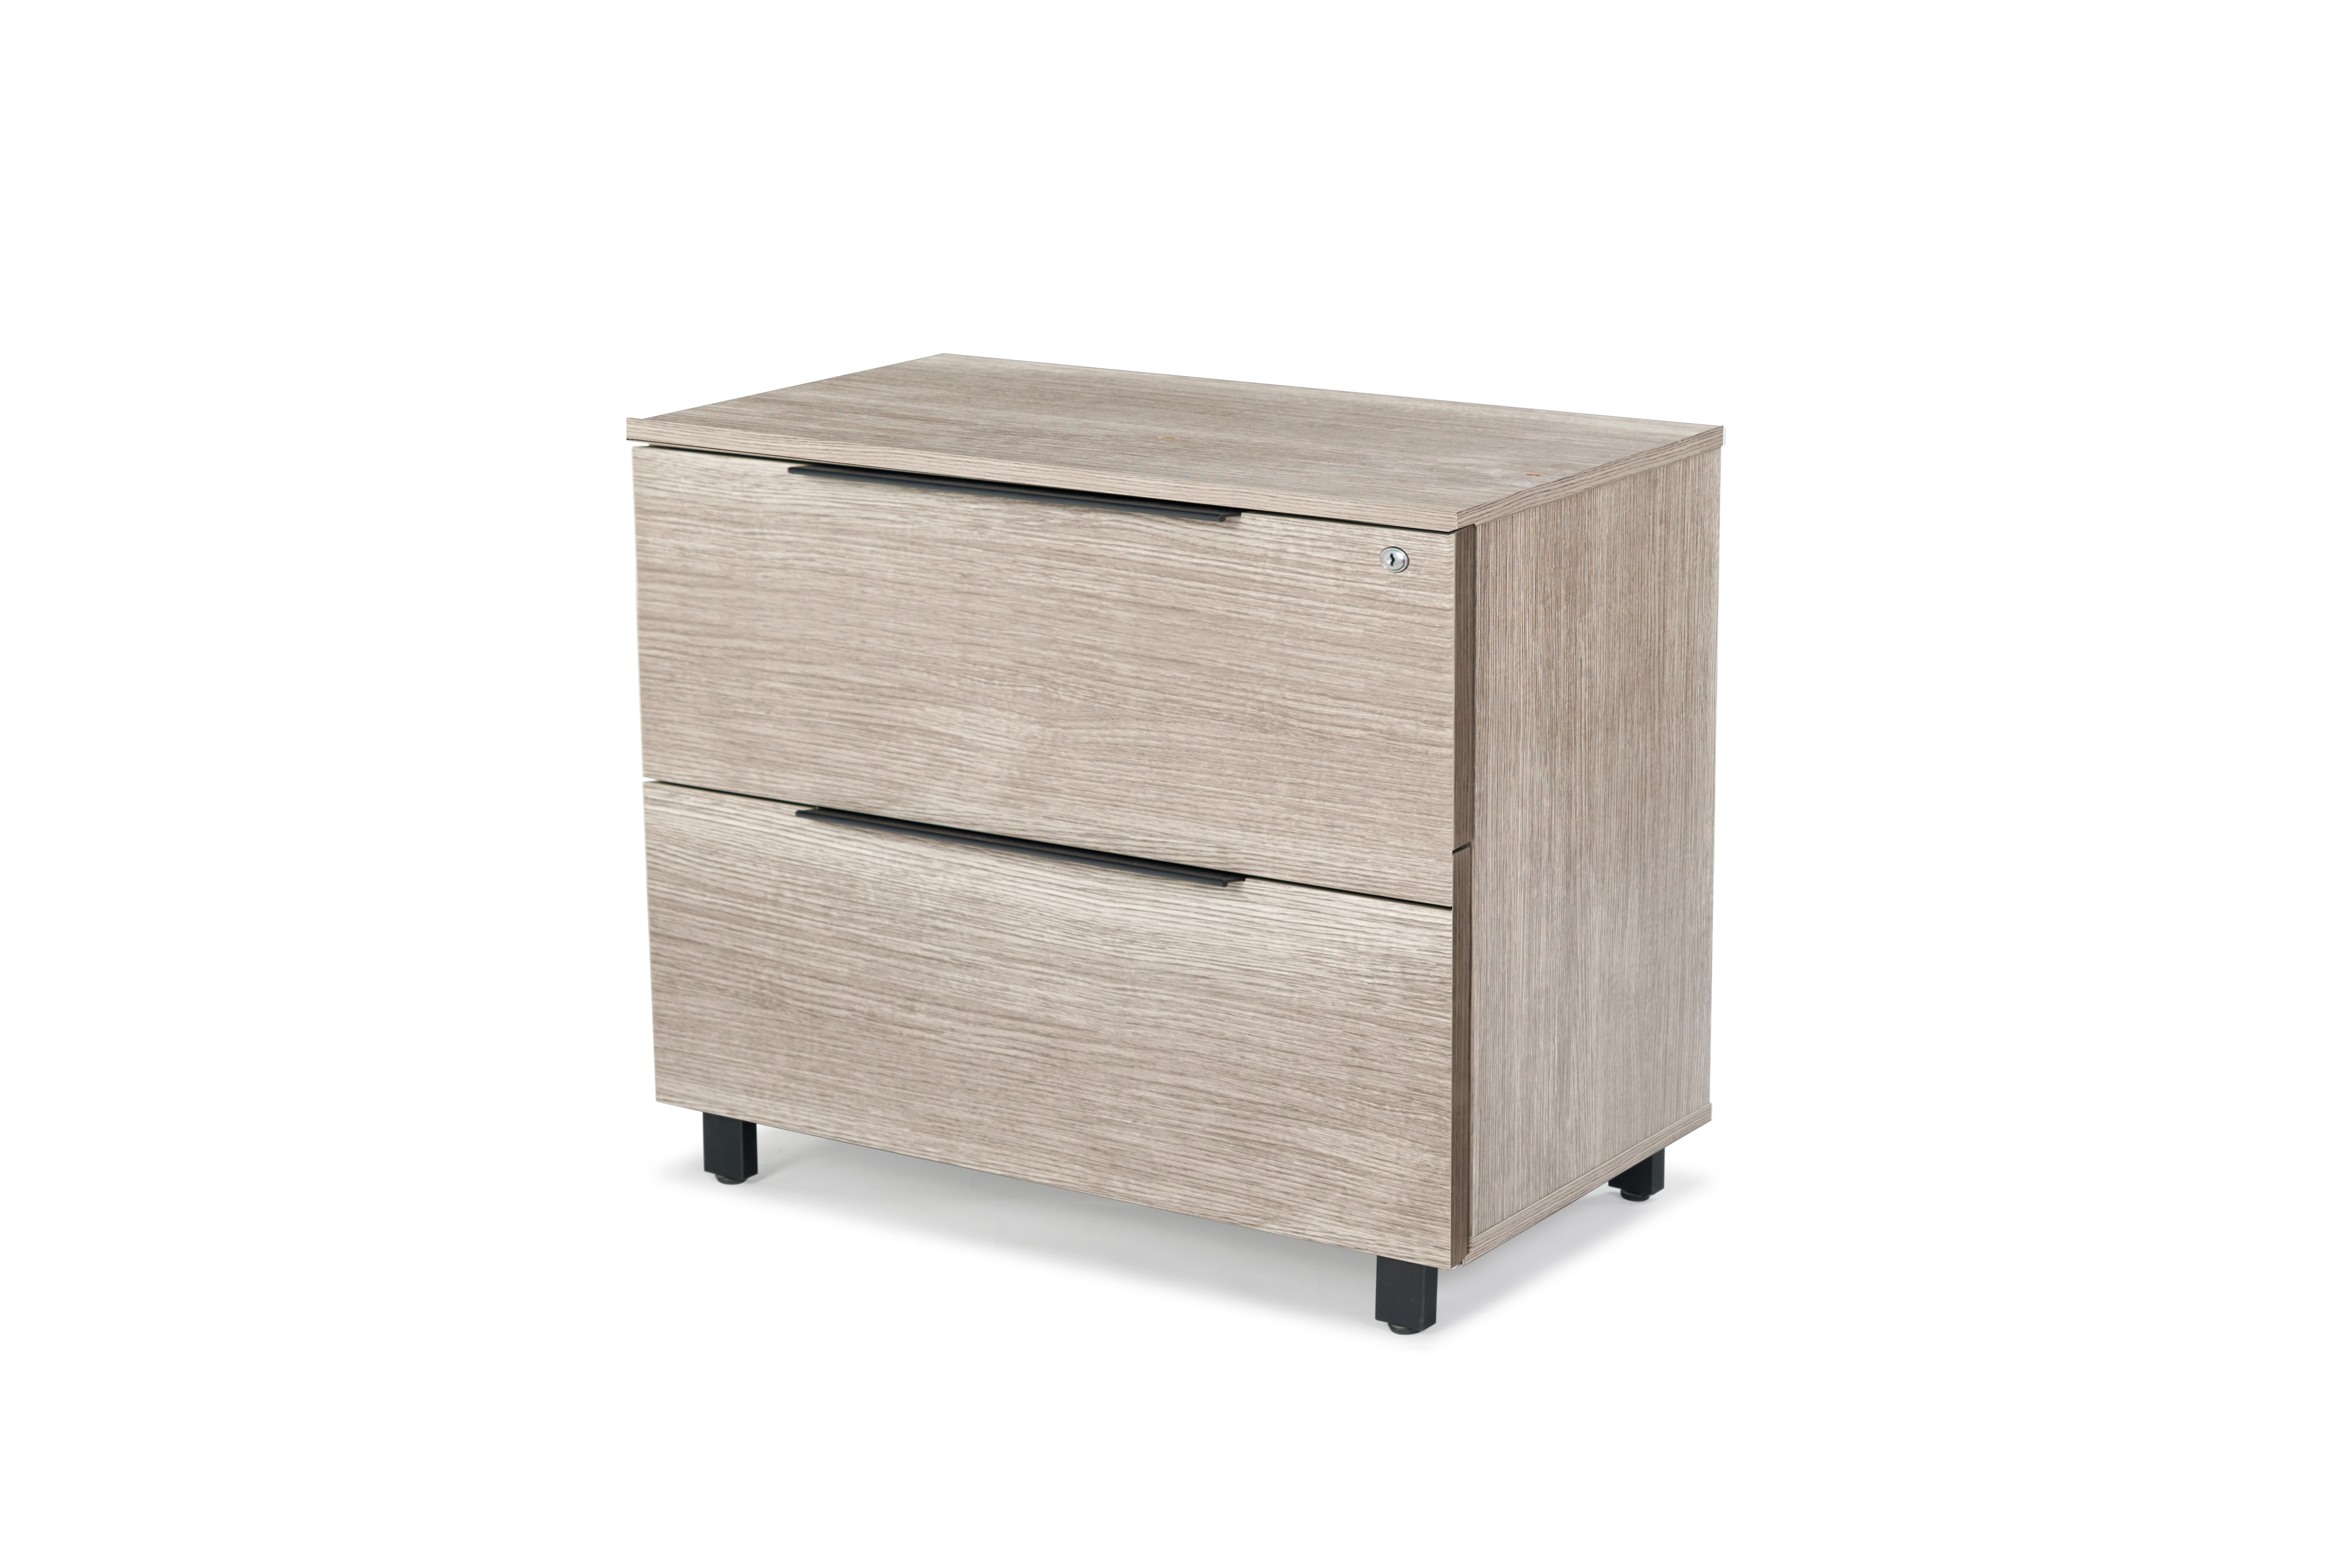 Ebern Designs Albin 2 Drawer Lateral Filing Cabinet Wayfair with regard to sizing 7283 X 4861